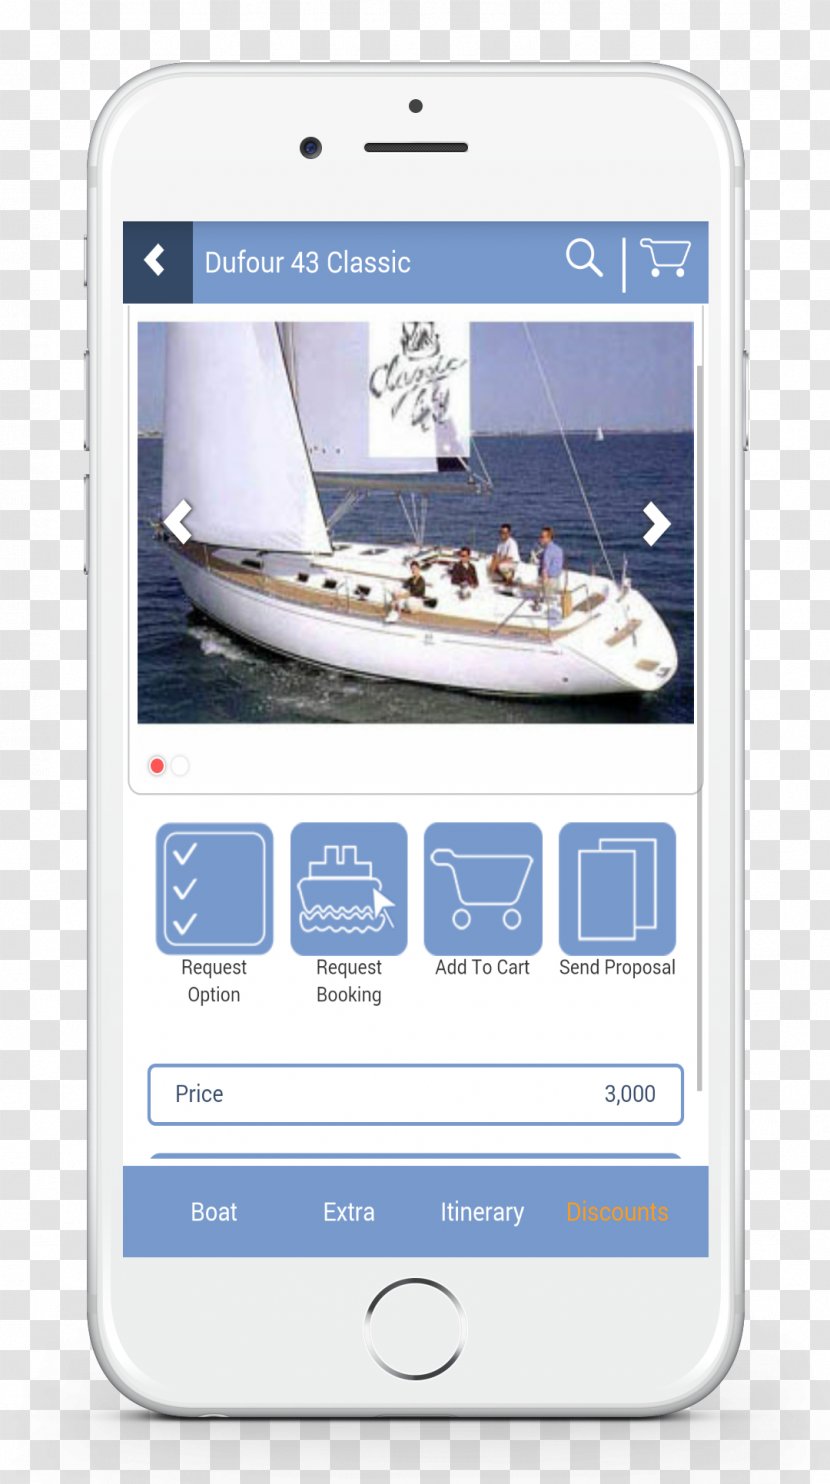 Feature Phone Smartphone Handheld Devices Multimedia Dufour Yachts - Portable Communications Device - Request For Proposal Button Transparent PNG